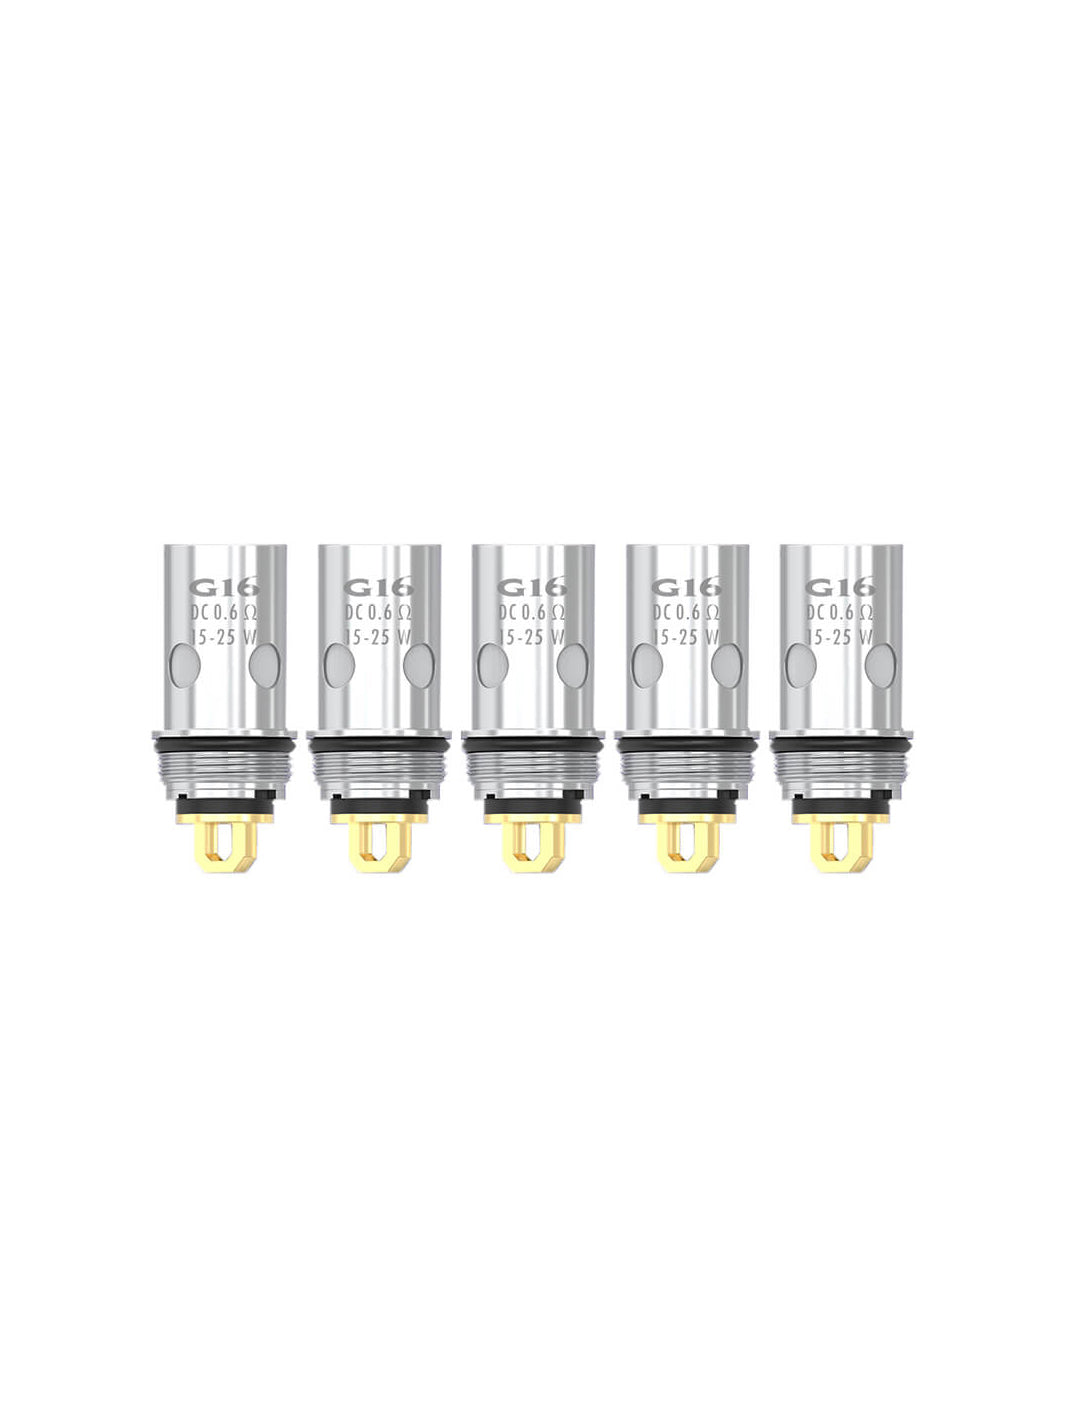 SMOK G16 Replacement Coils (5 Pack)